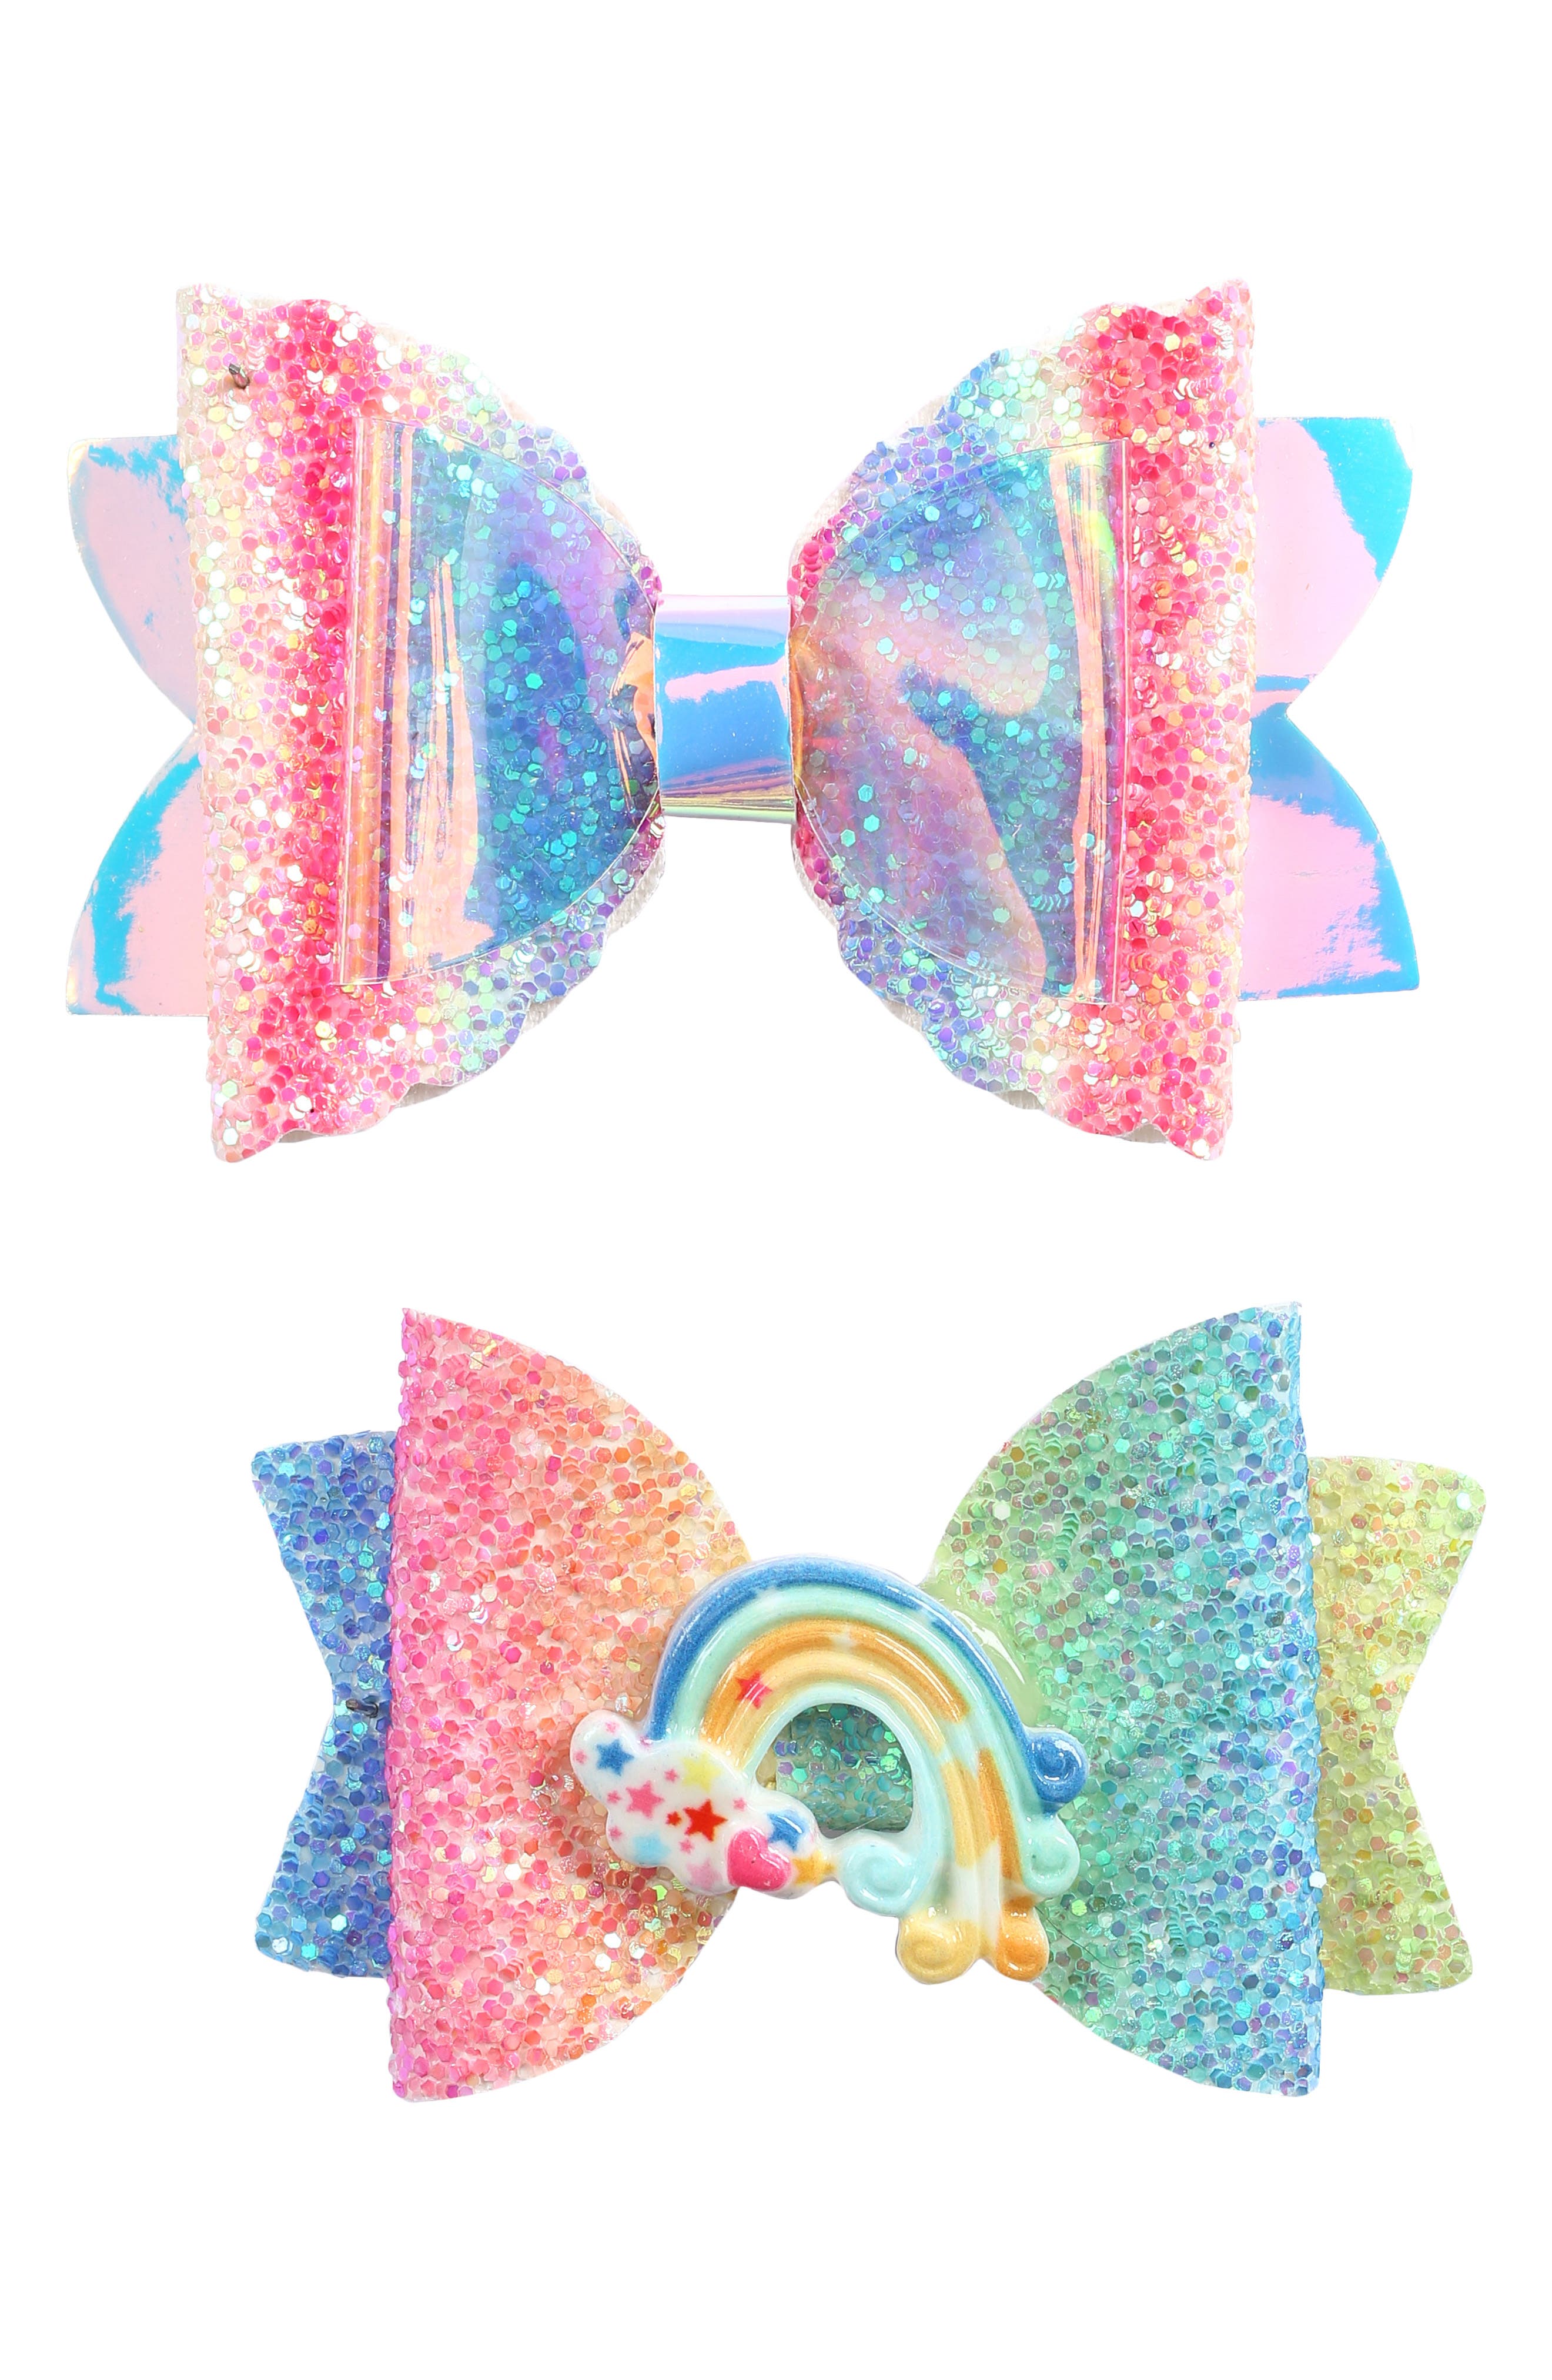 Slide Hair Accessories 3PC Girls/Baby Sequin Bling Party Bow Clip Set 